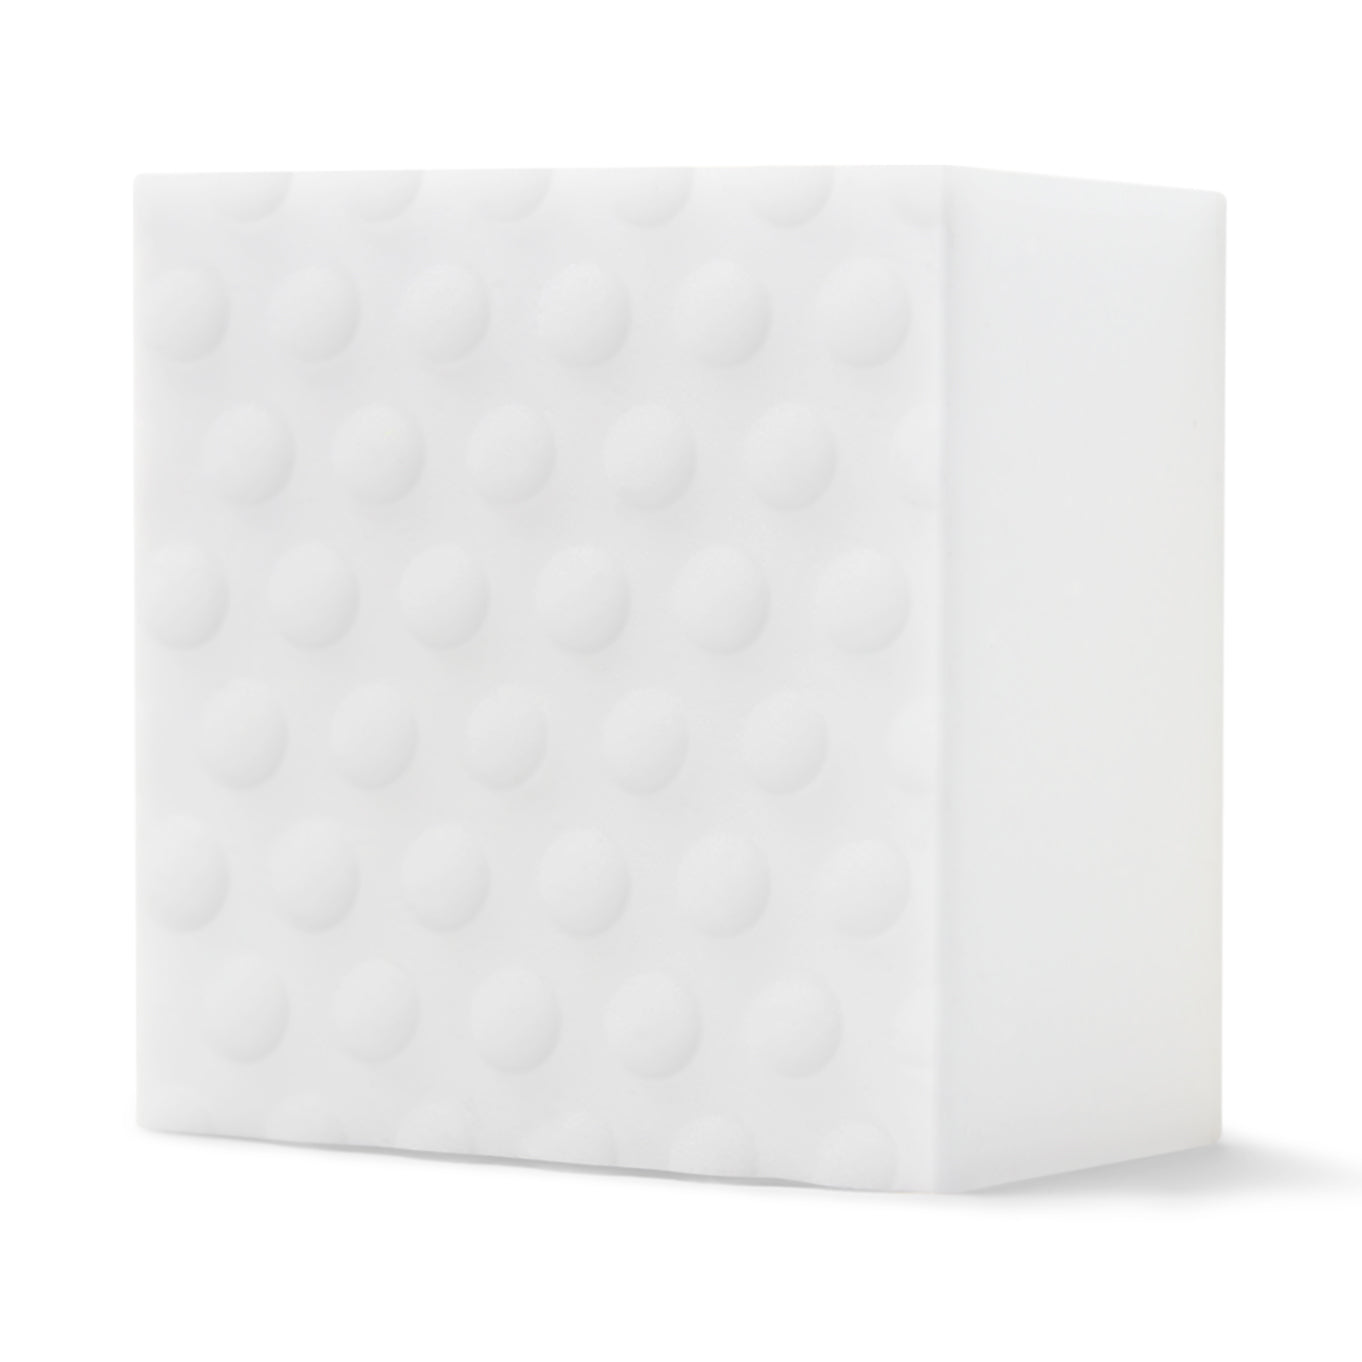 A white shoe cleaning sponge with textured bumps sitting on a white surface.